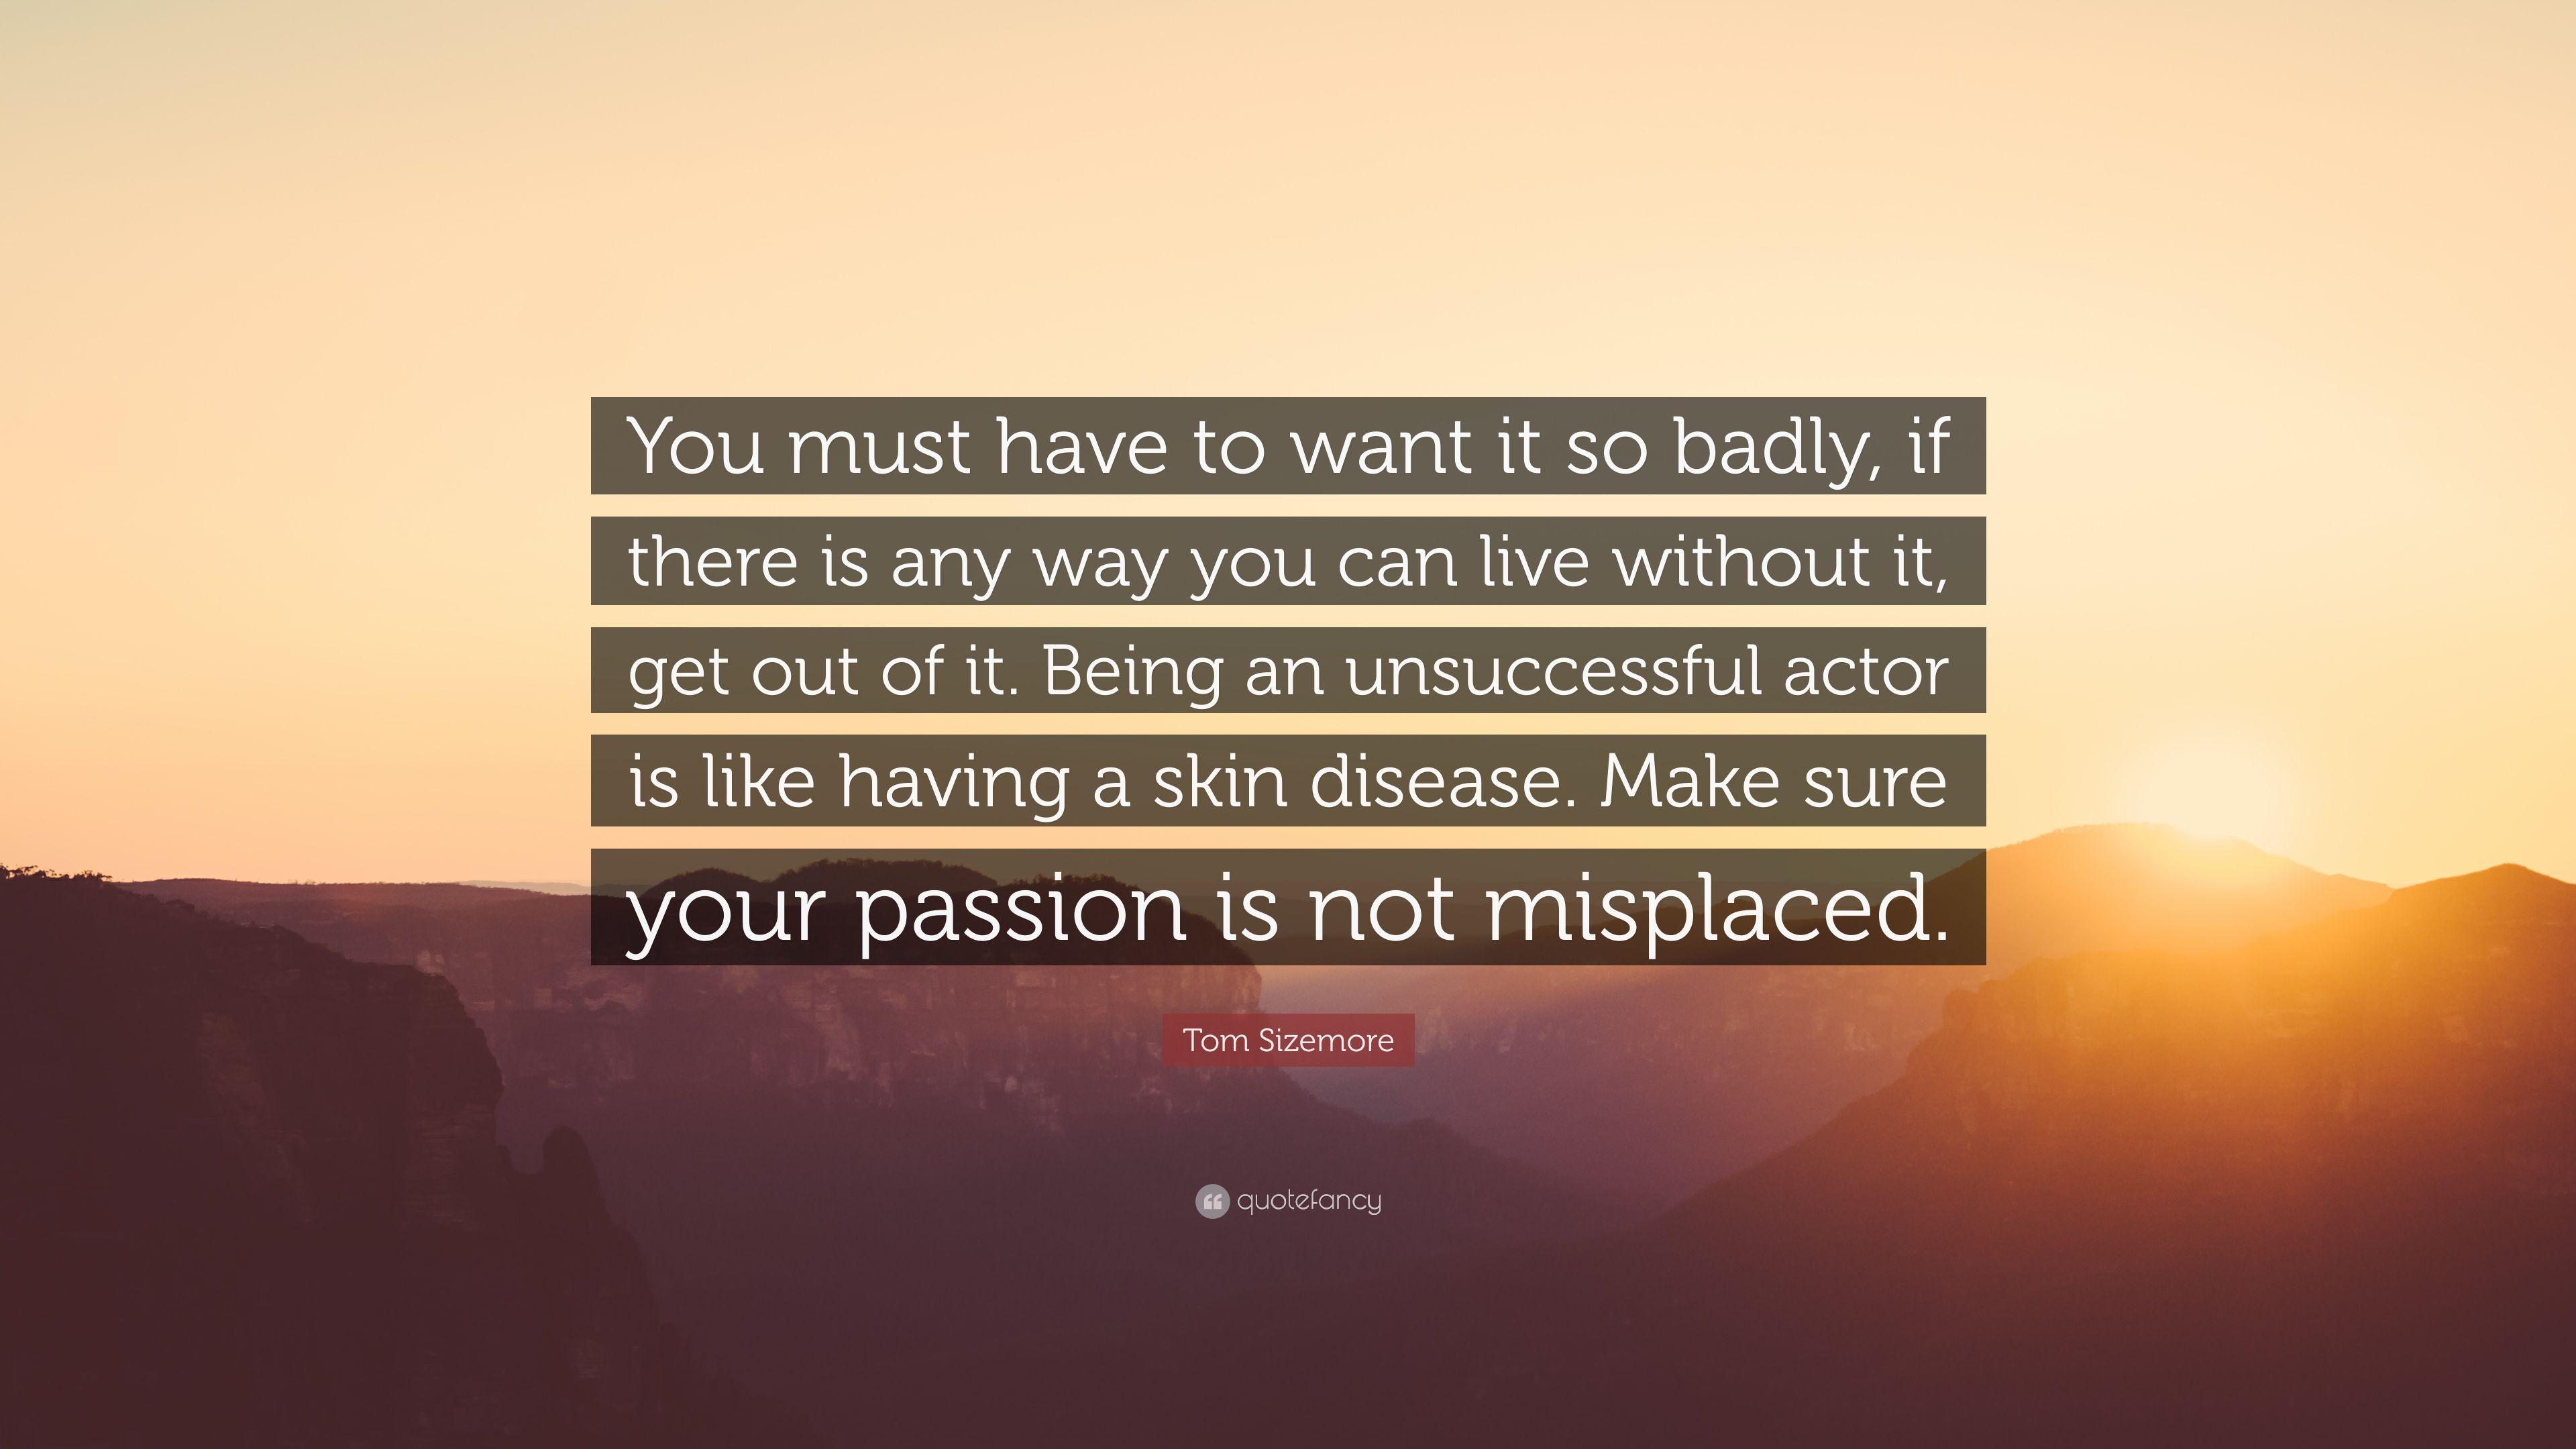 Tom Sizemore Quote: “You must have to want it so badly, if there